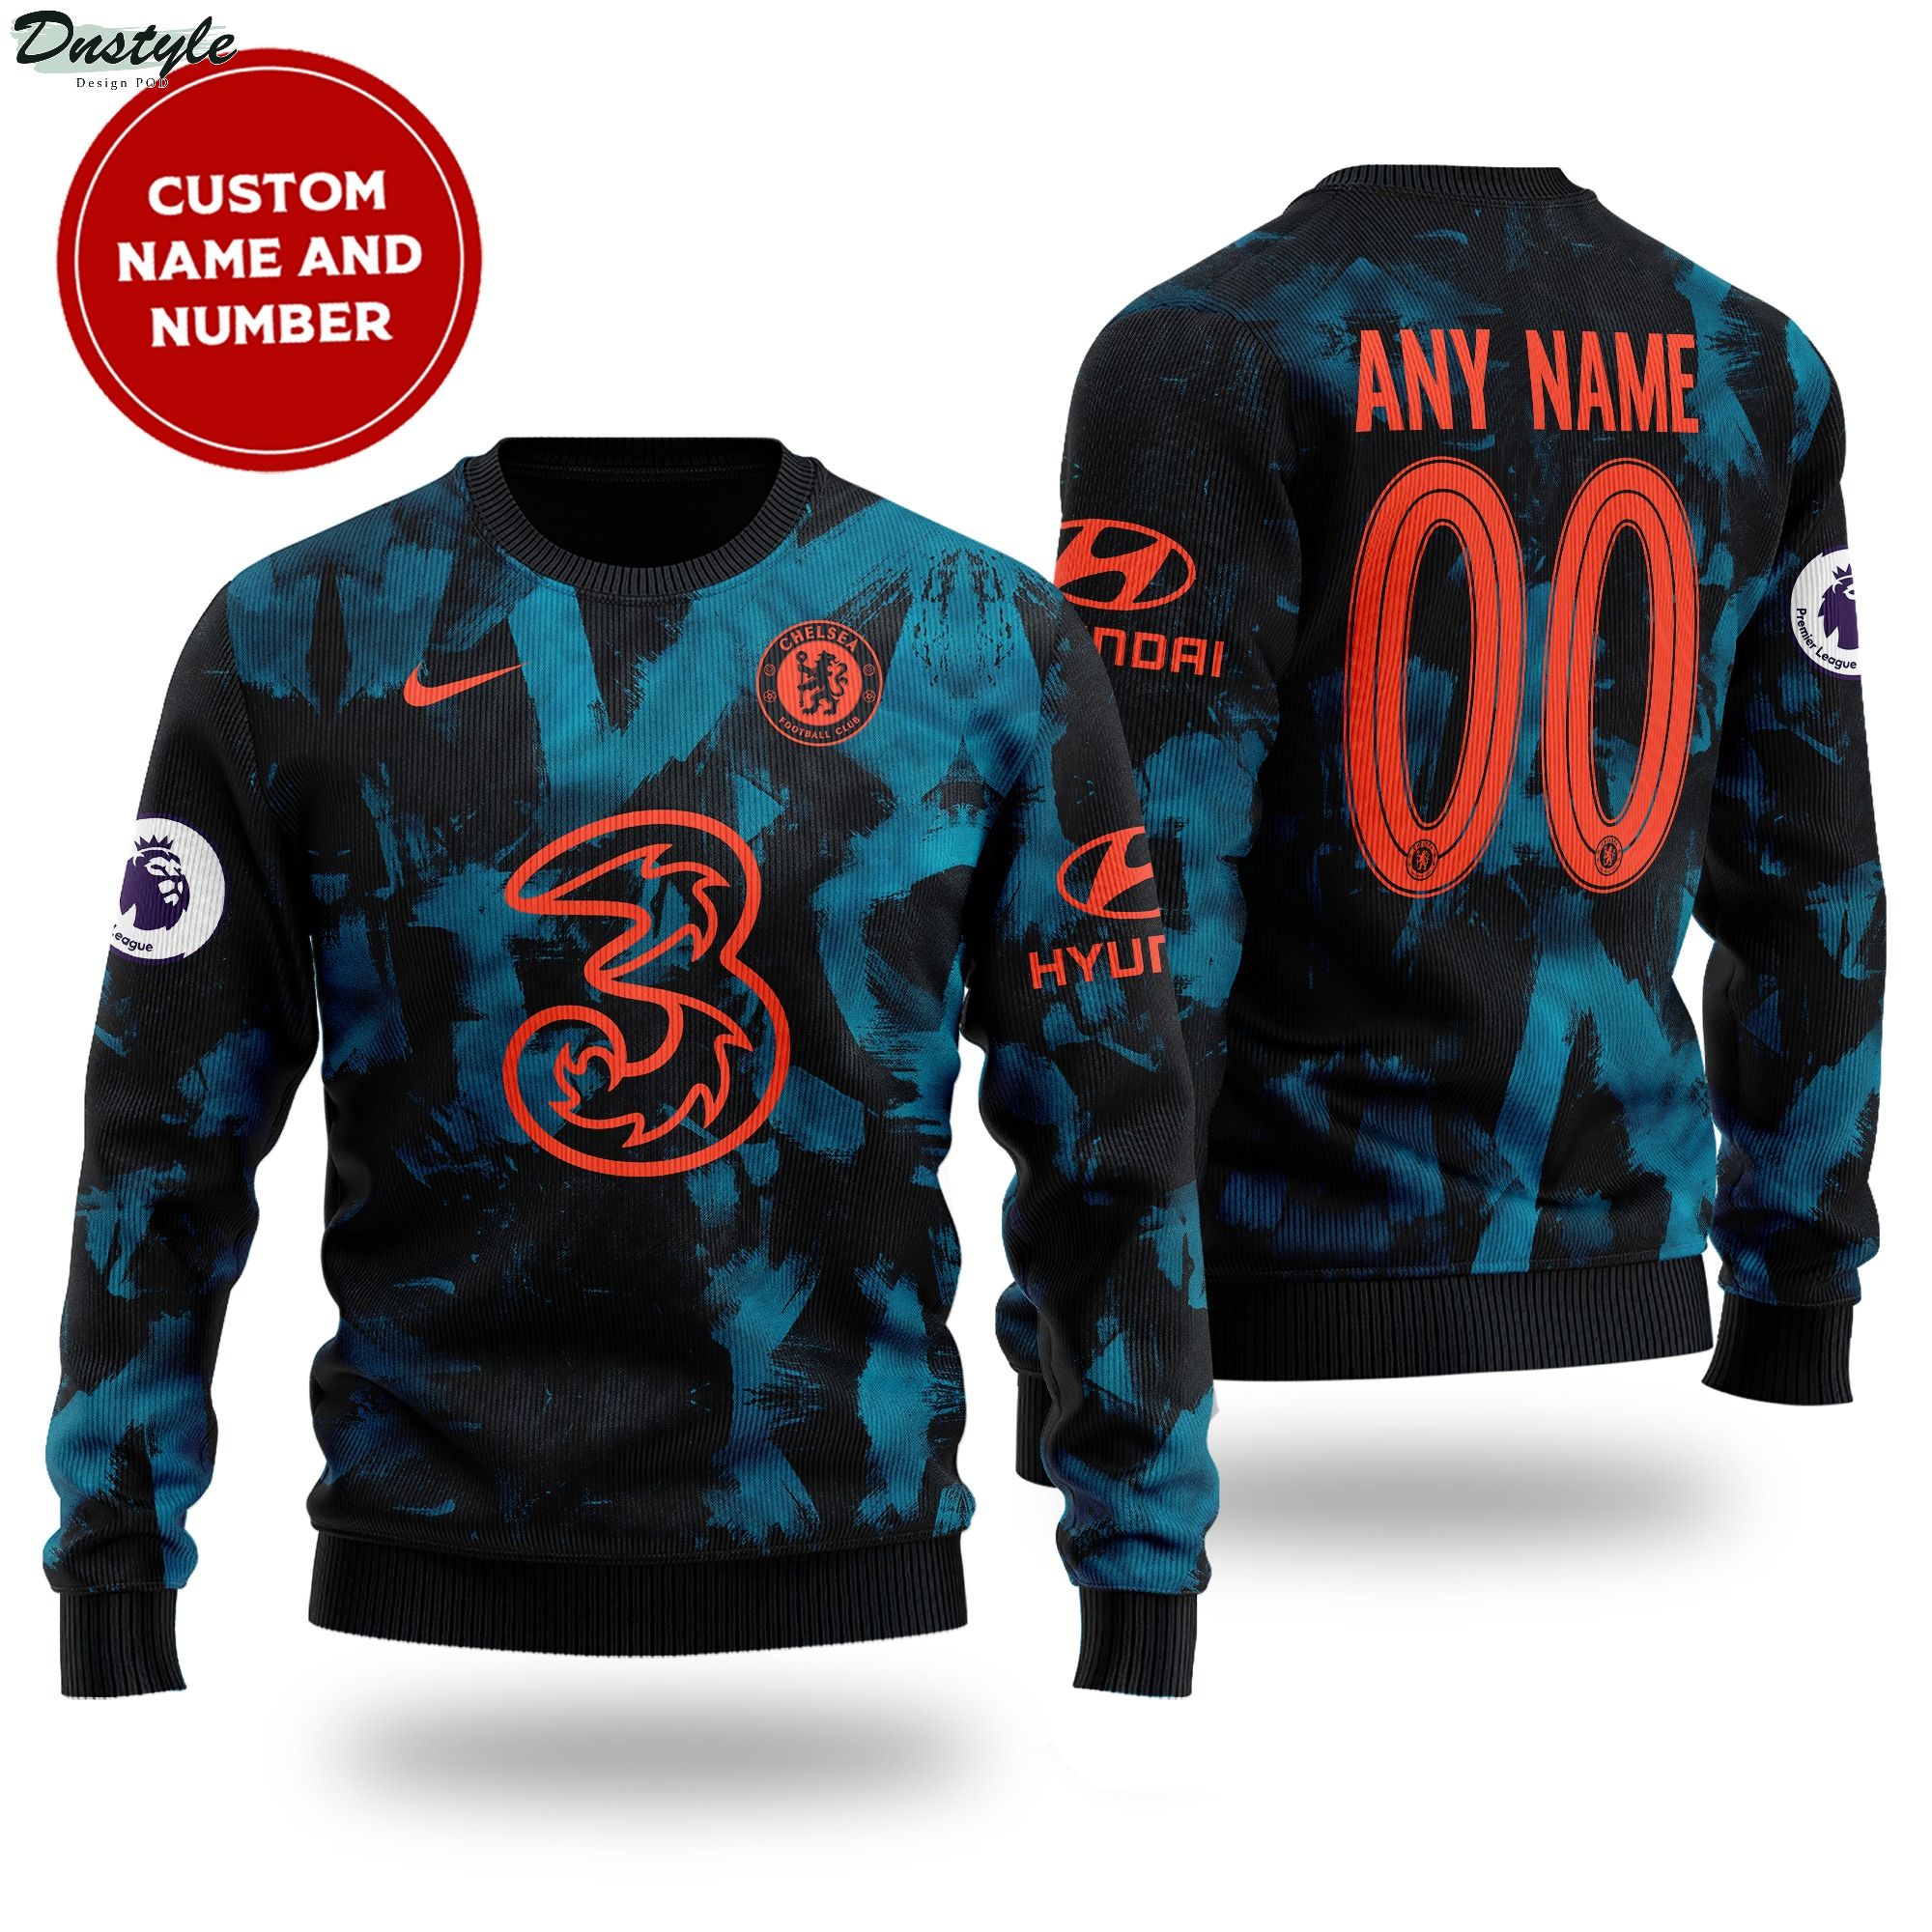 Chelsea custom name and number ugly sweater